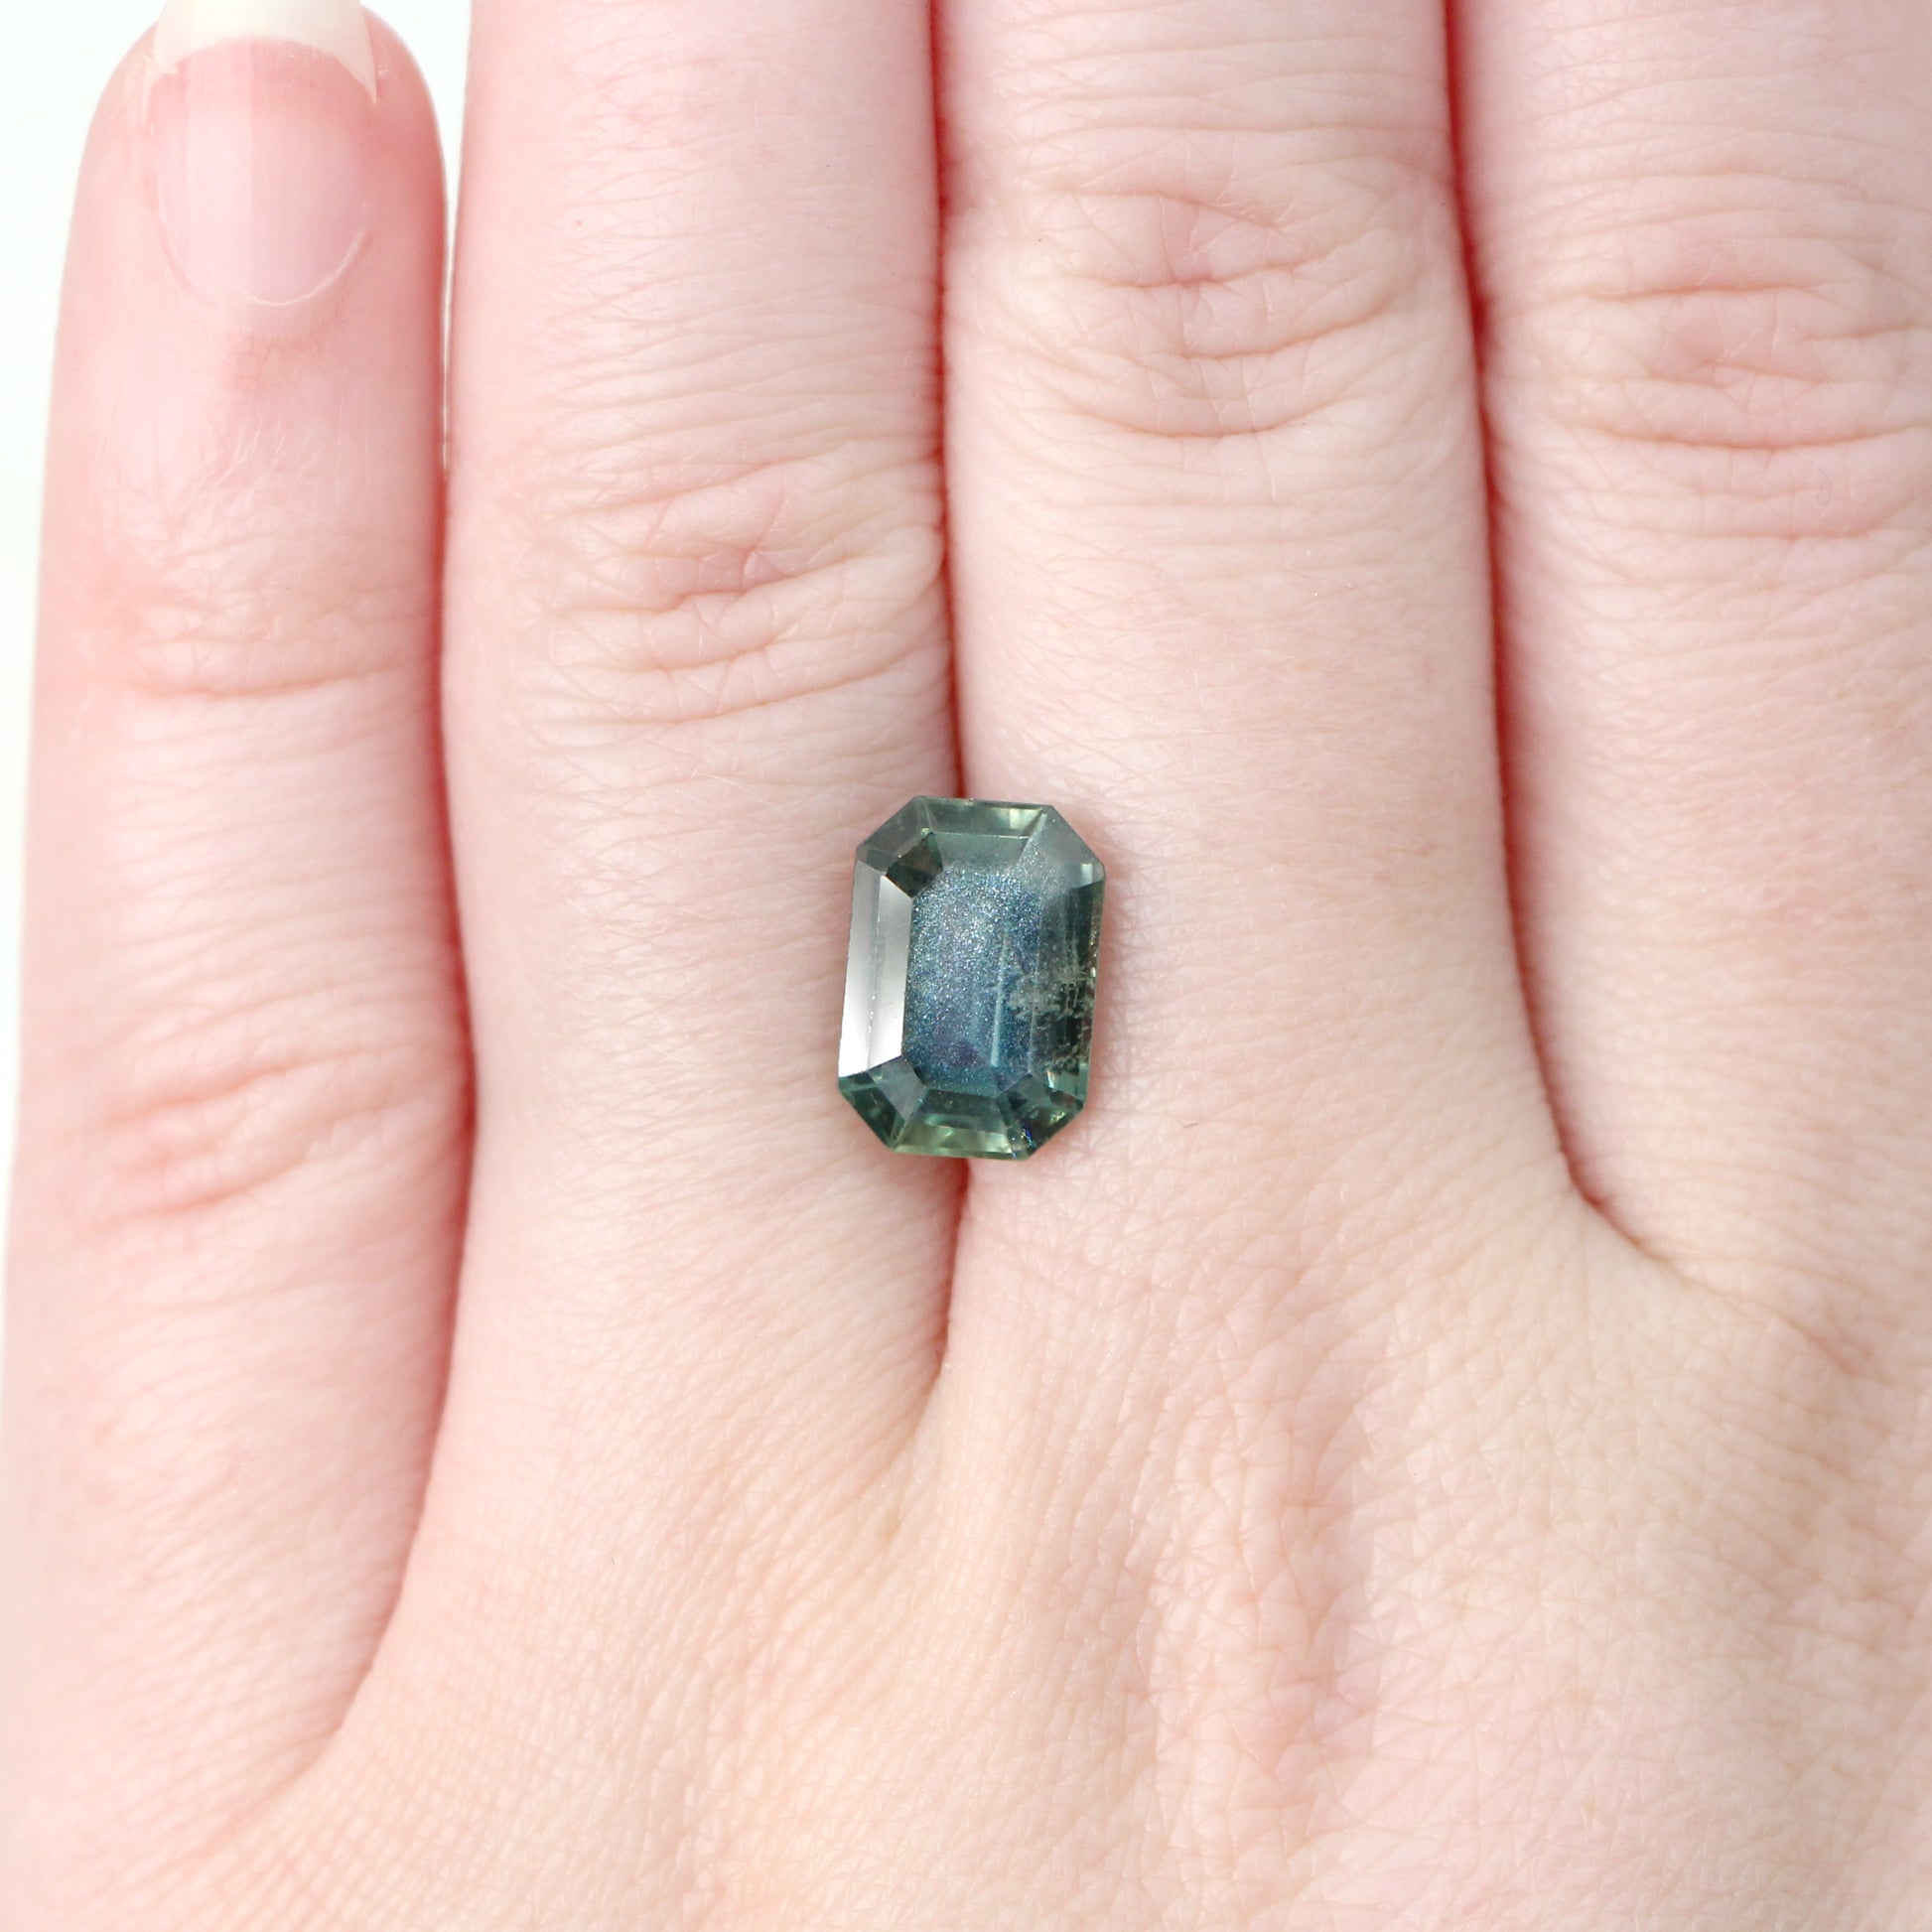 4.52 Carat Color-Change Teal Green Purple Emerald Cut Madagascar Sapphire for Custom Work - Inventory Code TGPS5452 - Midwinter Co. Alternative Bridal Rings and Modern Fine Jewelry